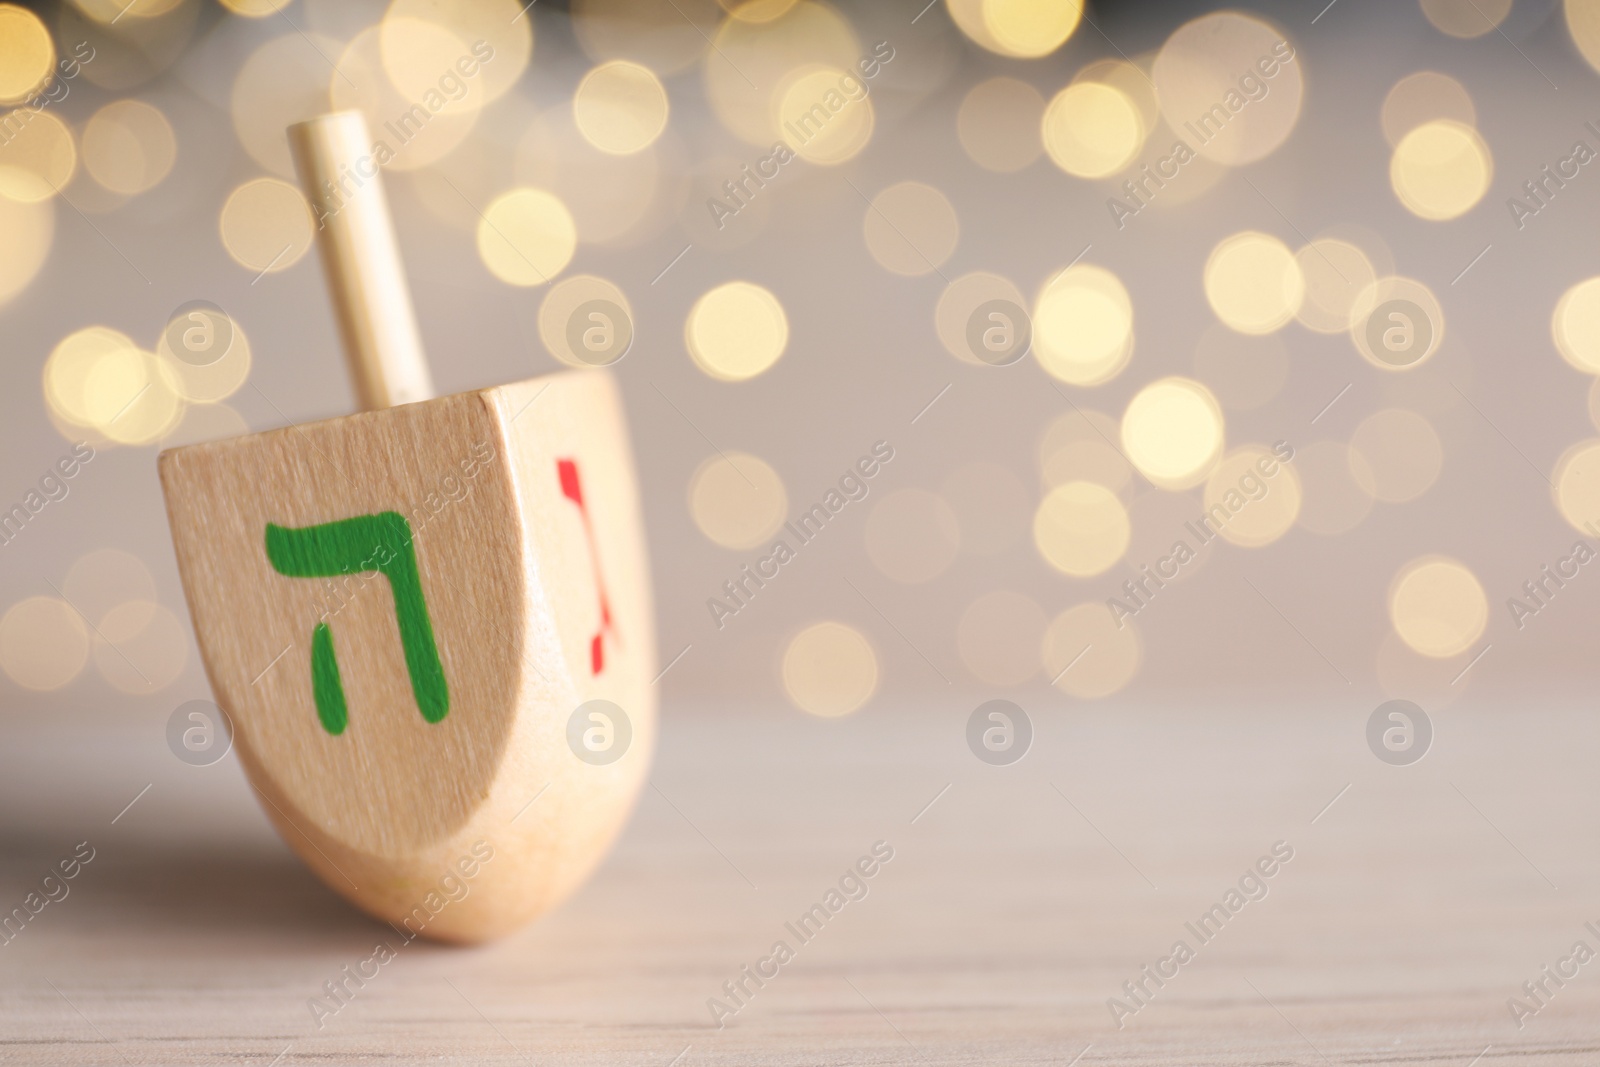 Photo of Hanukkah traditional dreidel with letters He and Gimel on wooden table against blurred lights, closeup. Space for text